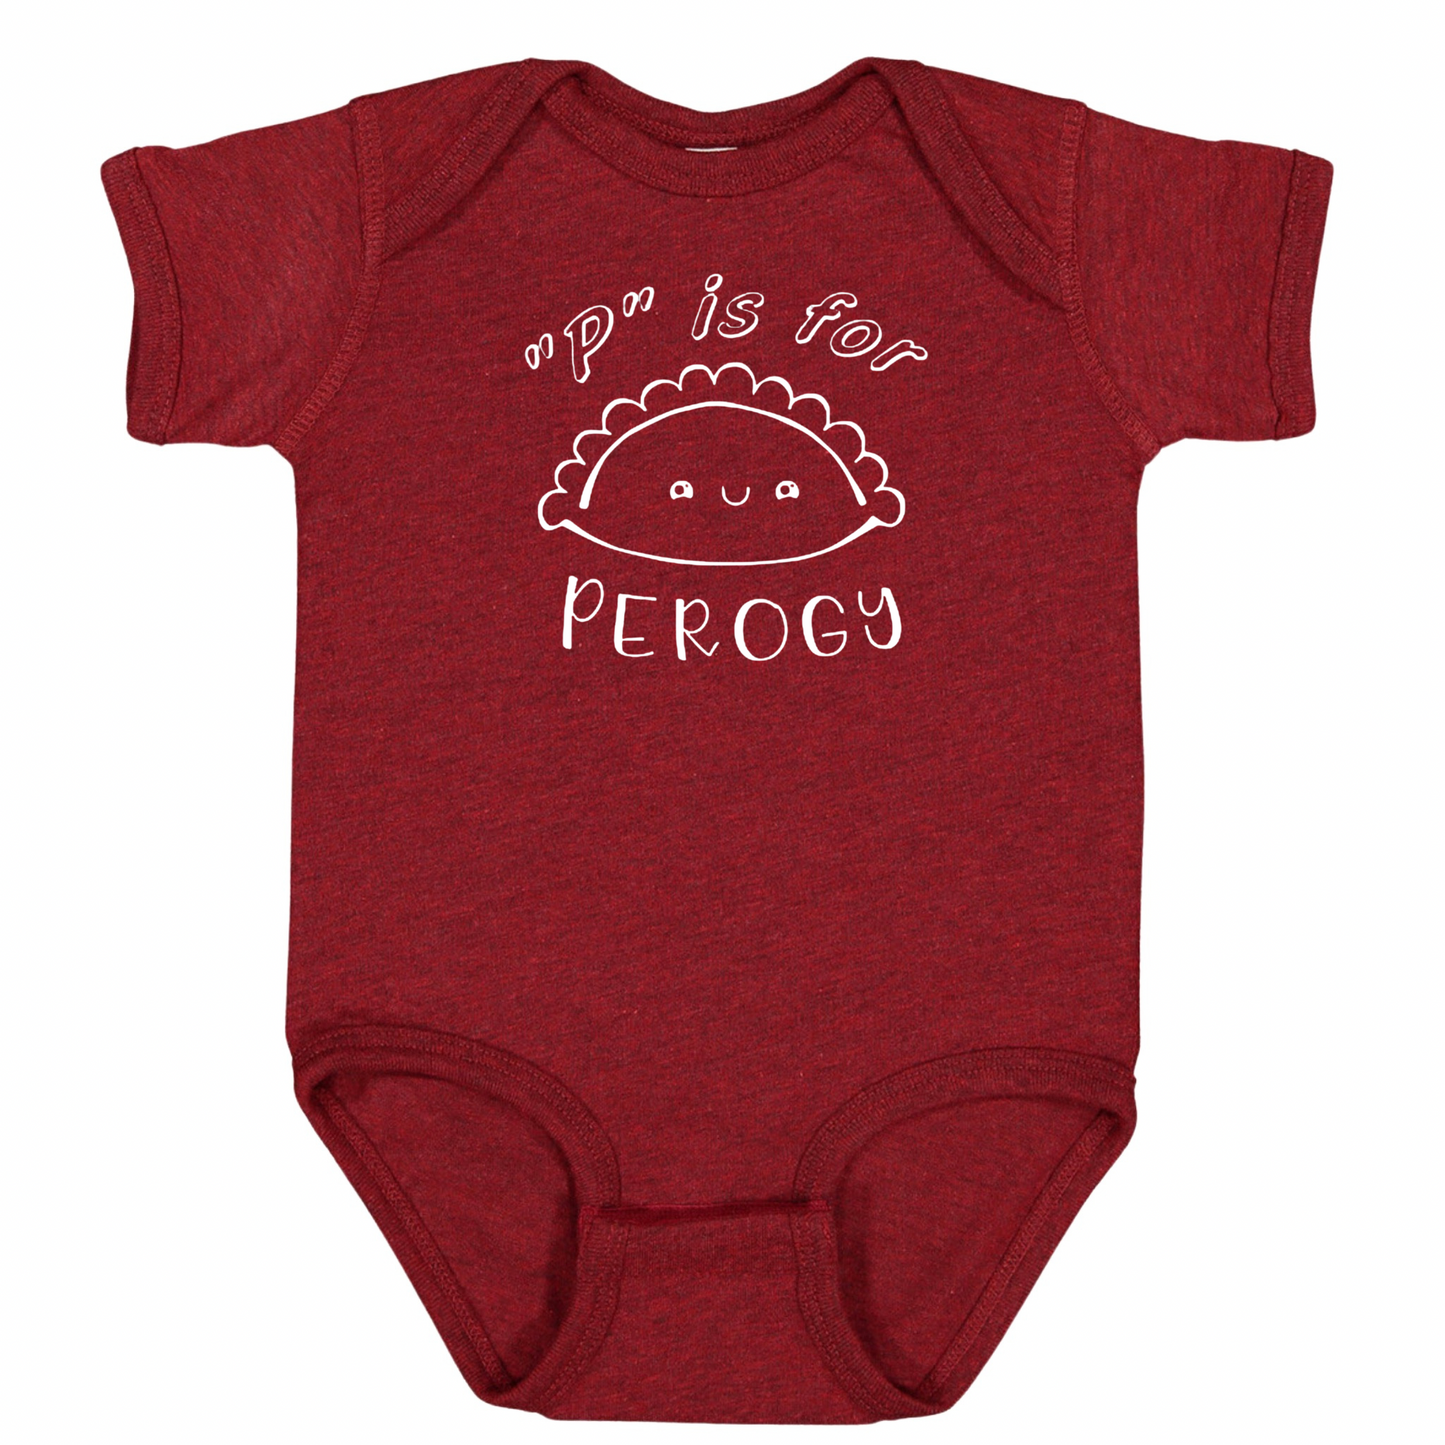 “P” IS FOR PEROGY (White Font)- Short Sleeve Onesie